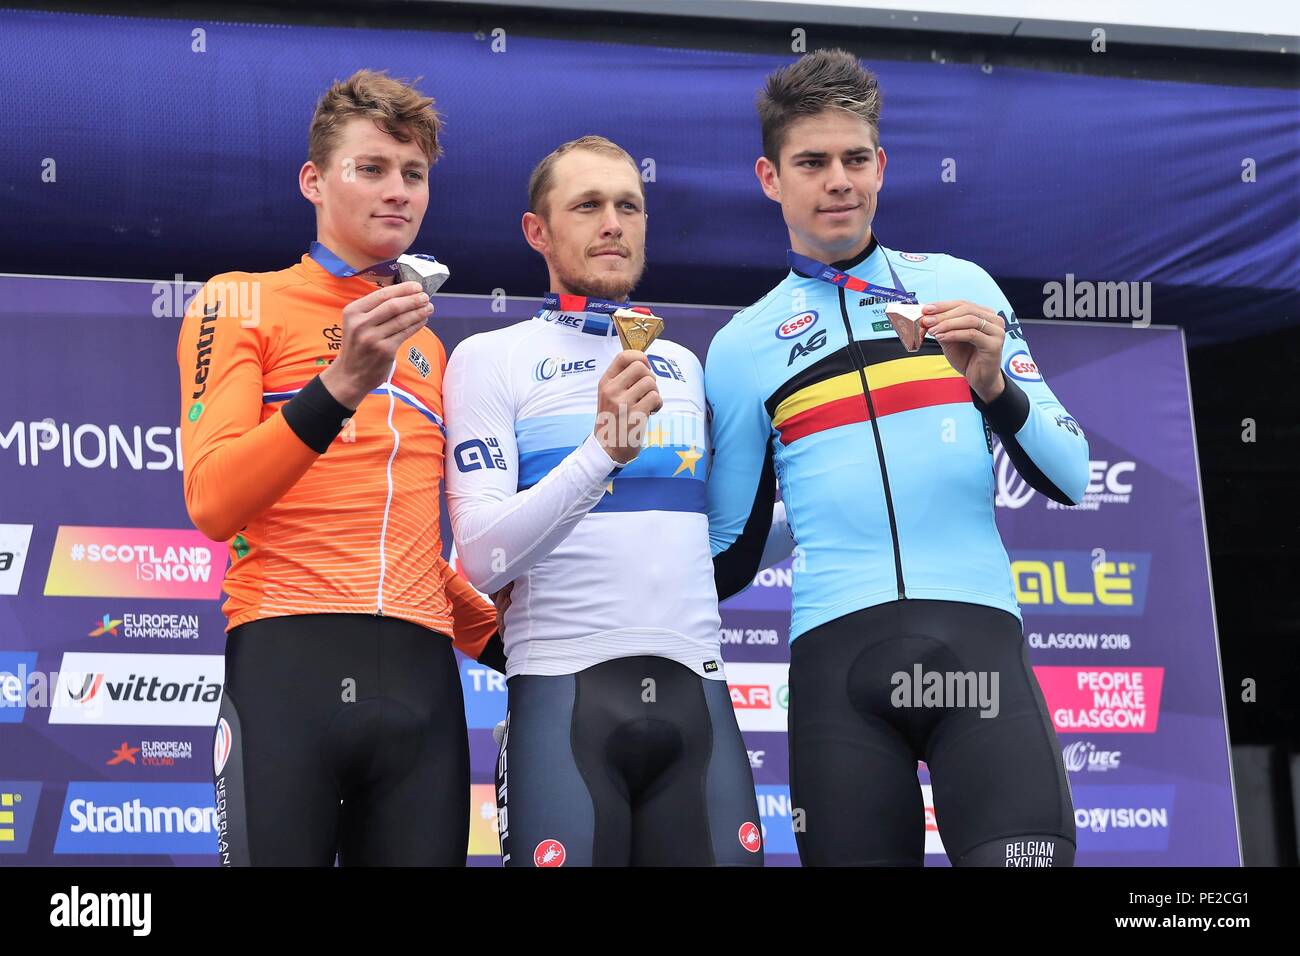 Scotland, UK. 12th August 2018. Mathieu Van der Poel (Netherlands),Matteo  Trentin (Italy) and Wout Van Aert (Belgium) during the Road Cycling  European Championships Glasgow 2018, in Glasgow City Centre and  metropolitan areas